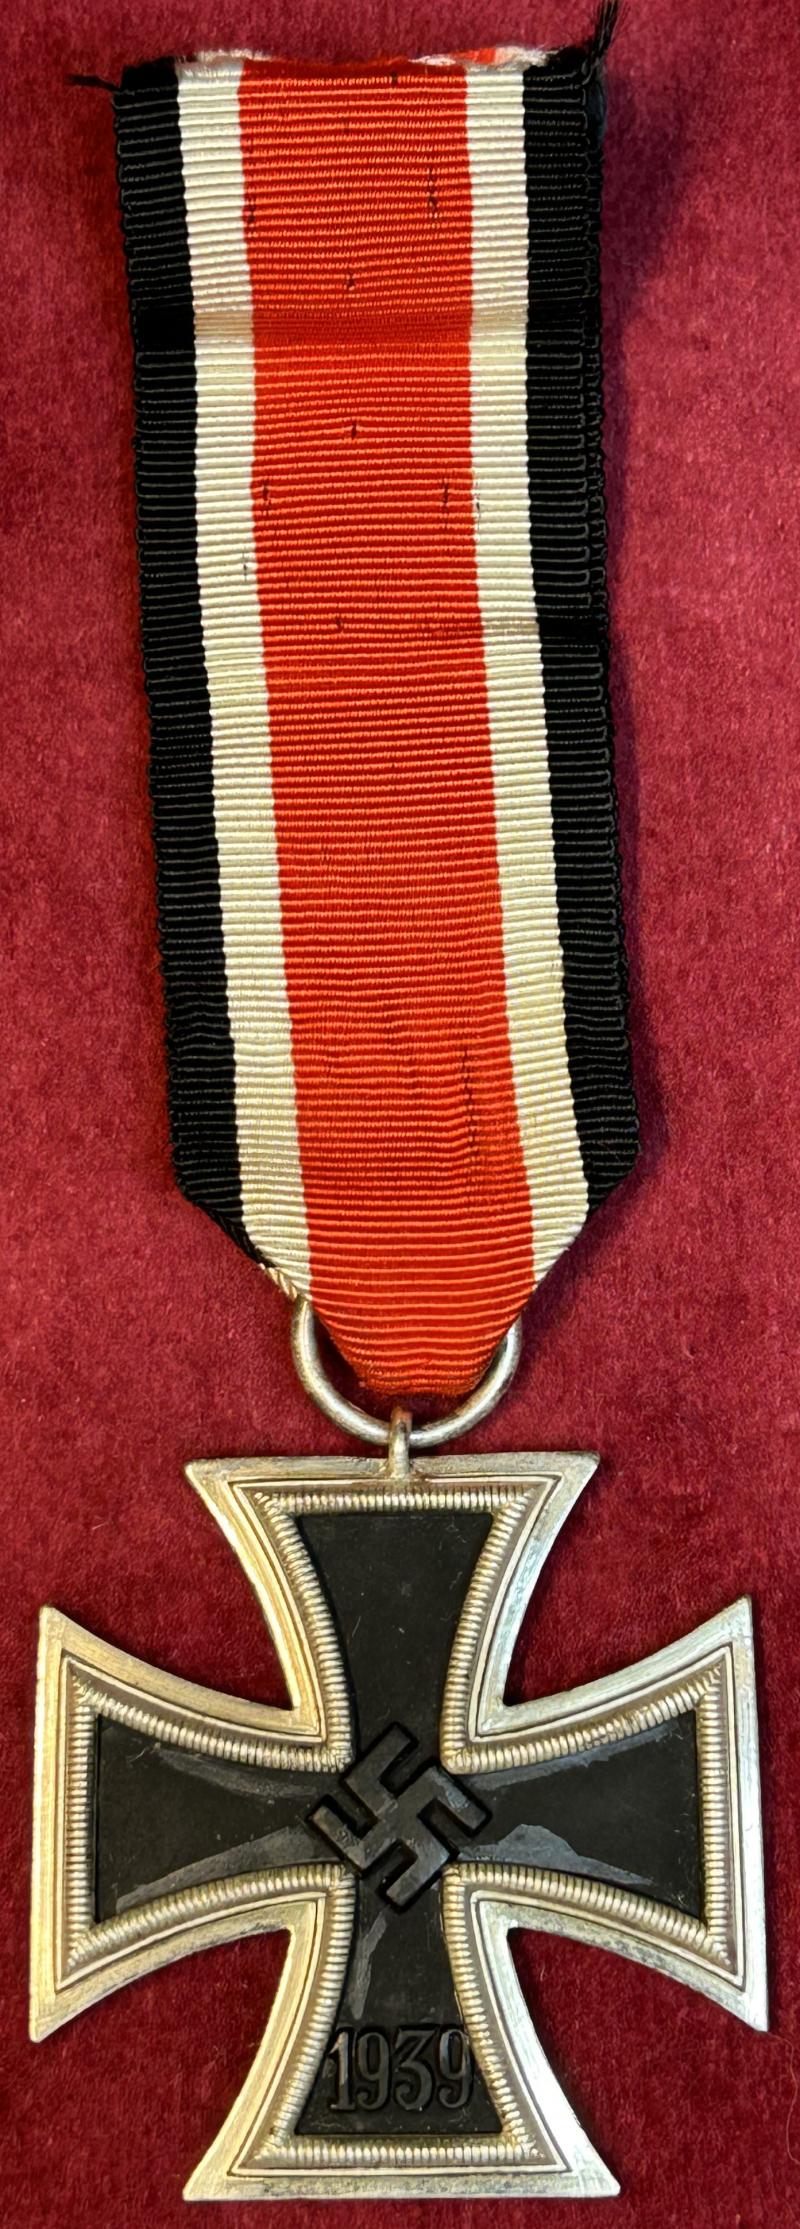 In an excellent condition a Iron Cross 2nd class 1939 (65)